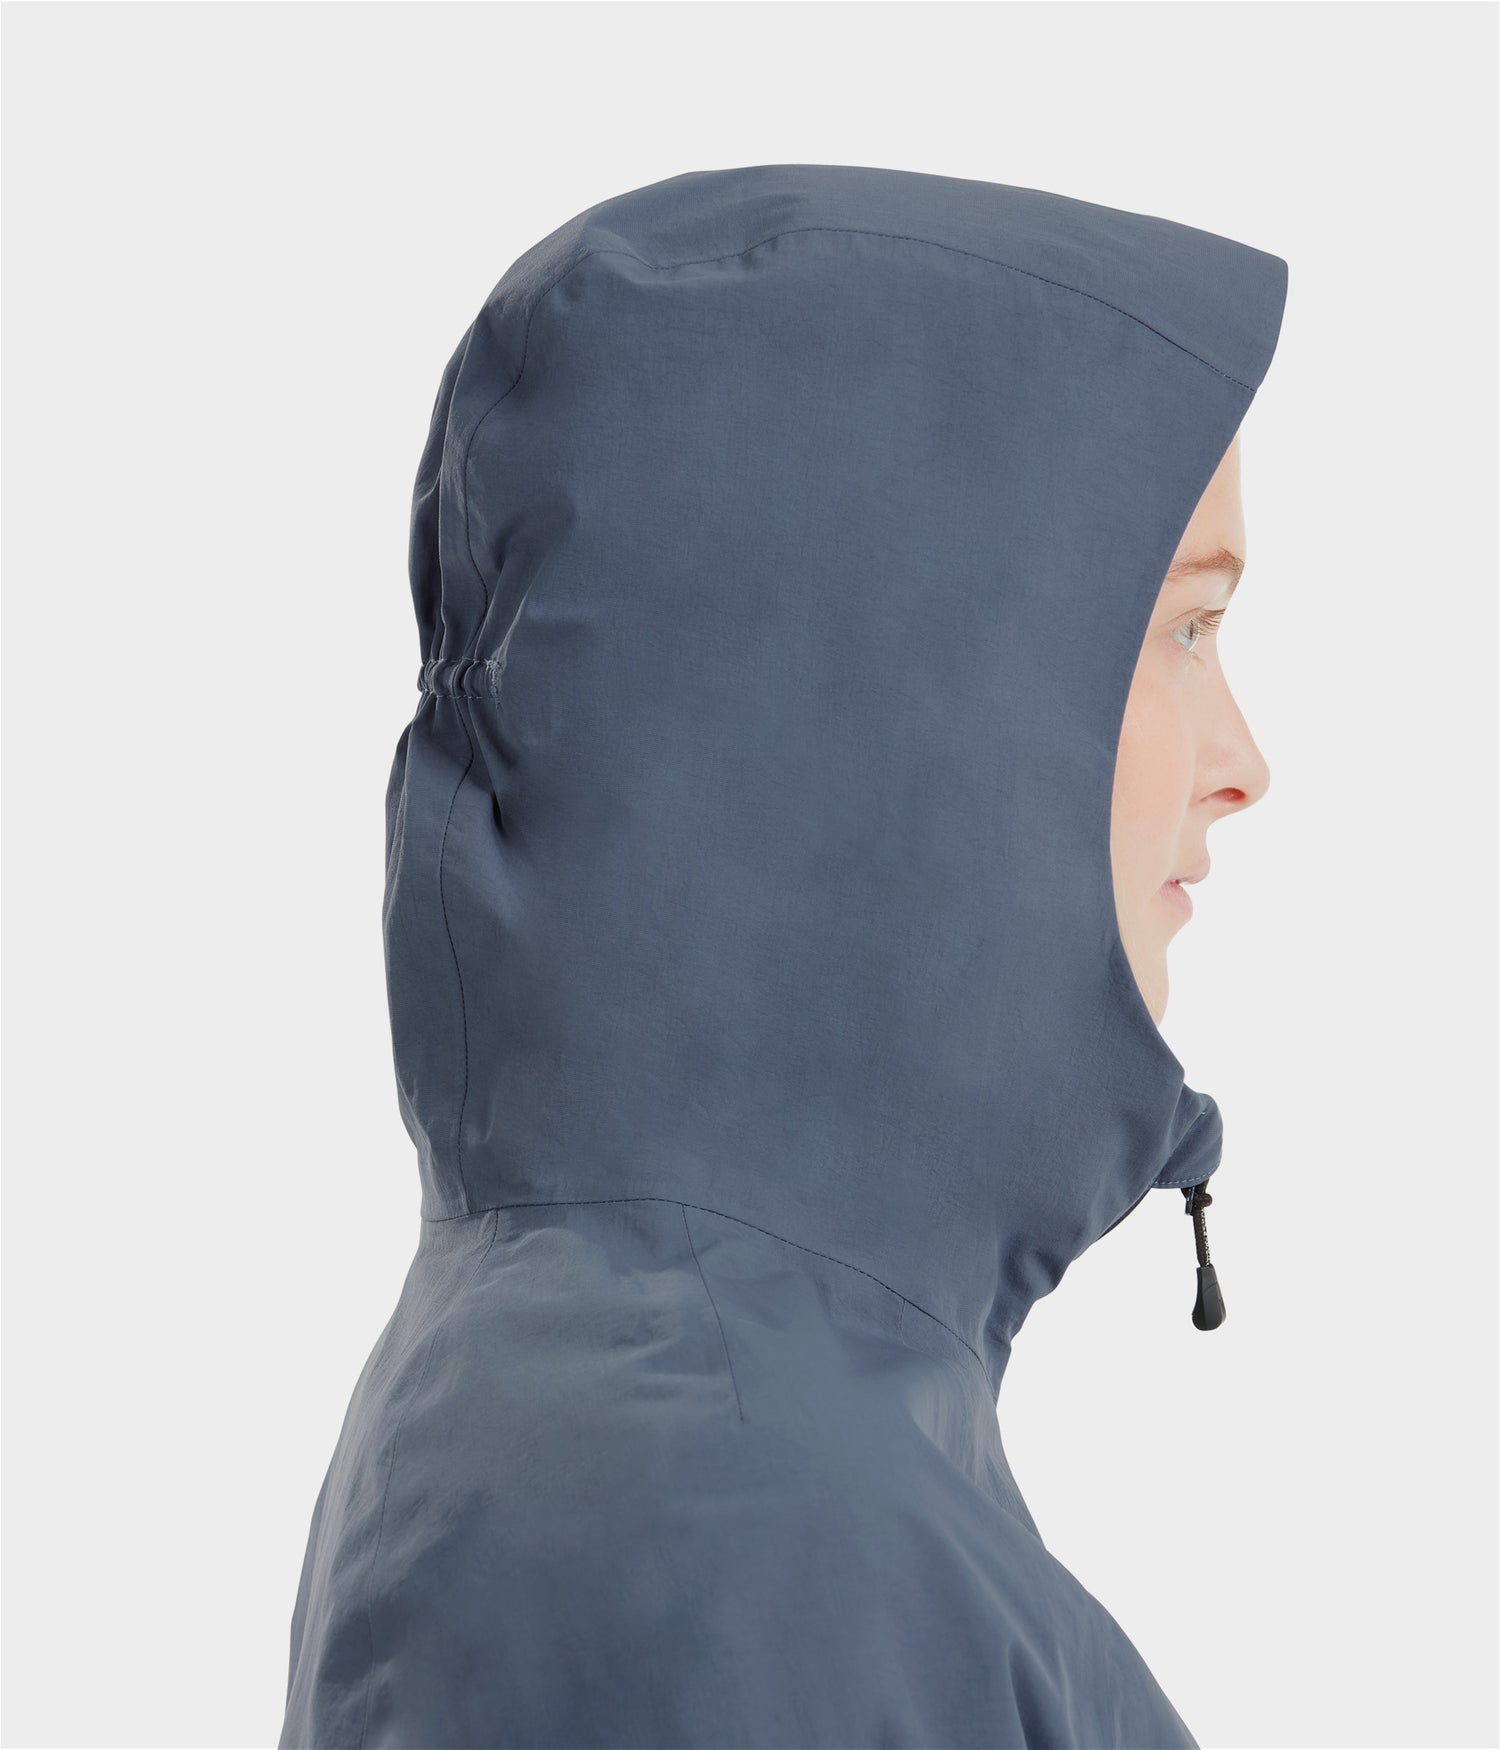 equestrian rain jacket for competitions